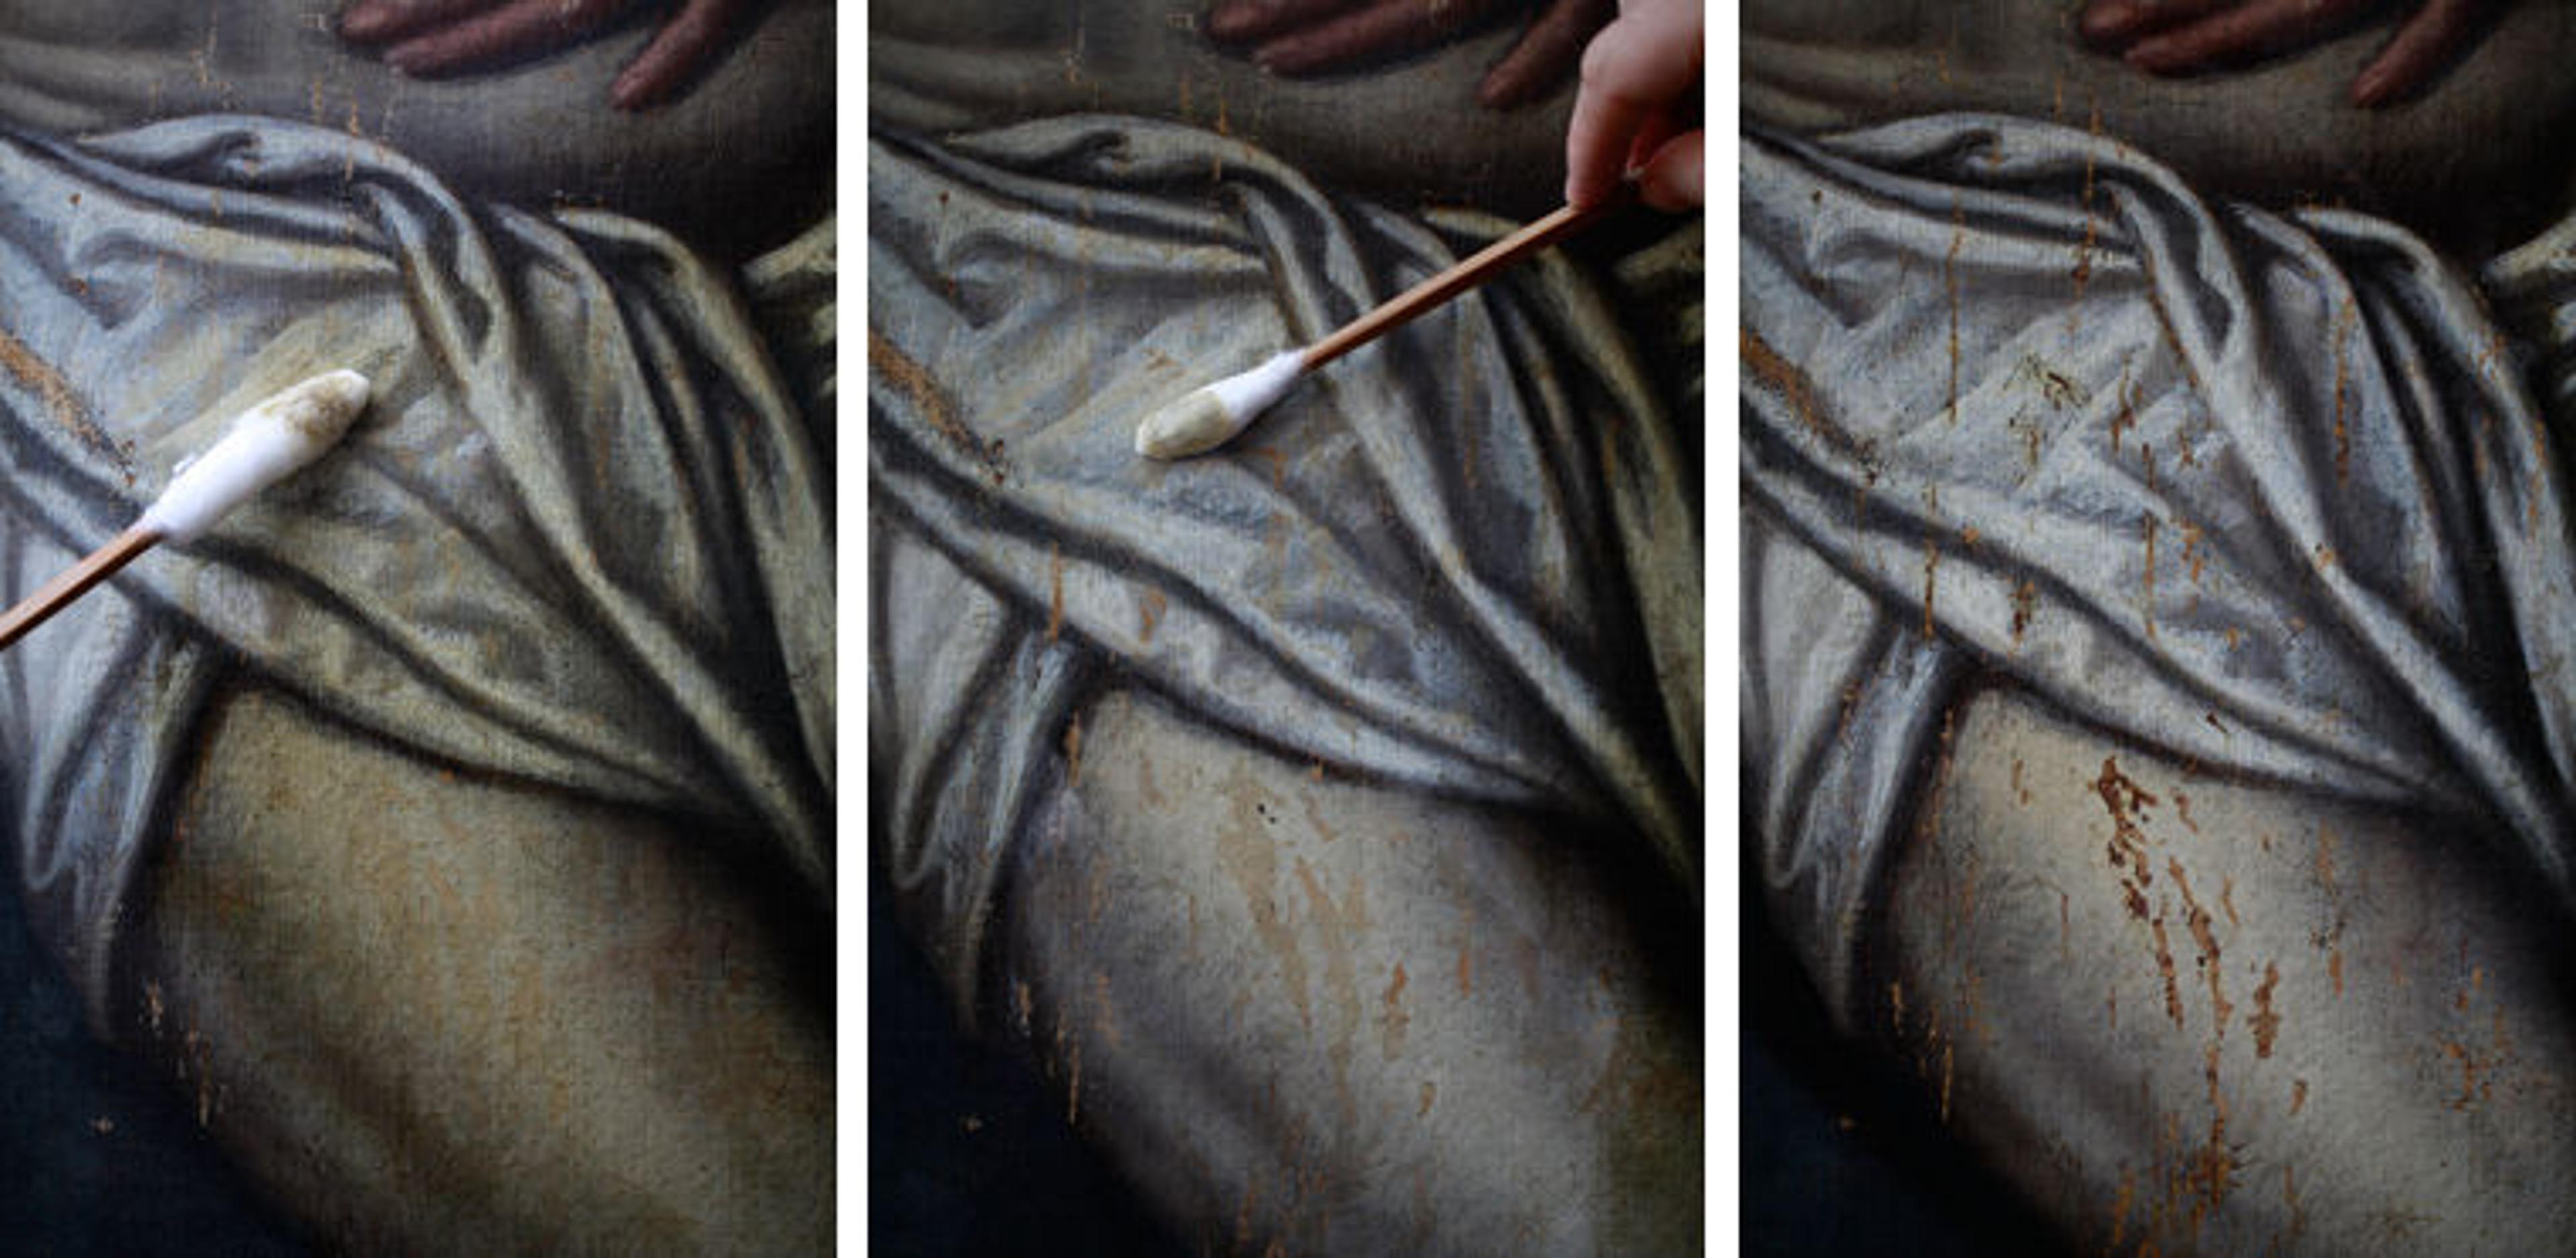 Three images showing various states of conservation treatment on a sixteenth-century painting